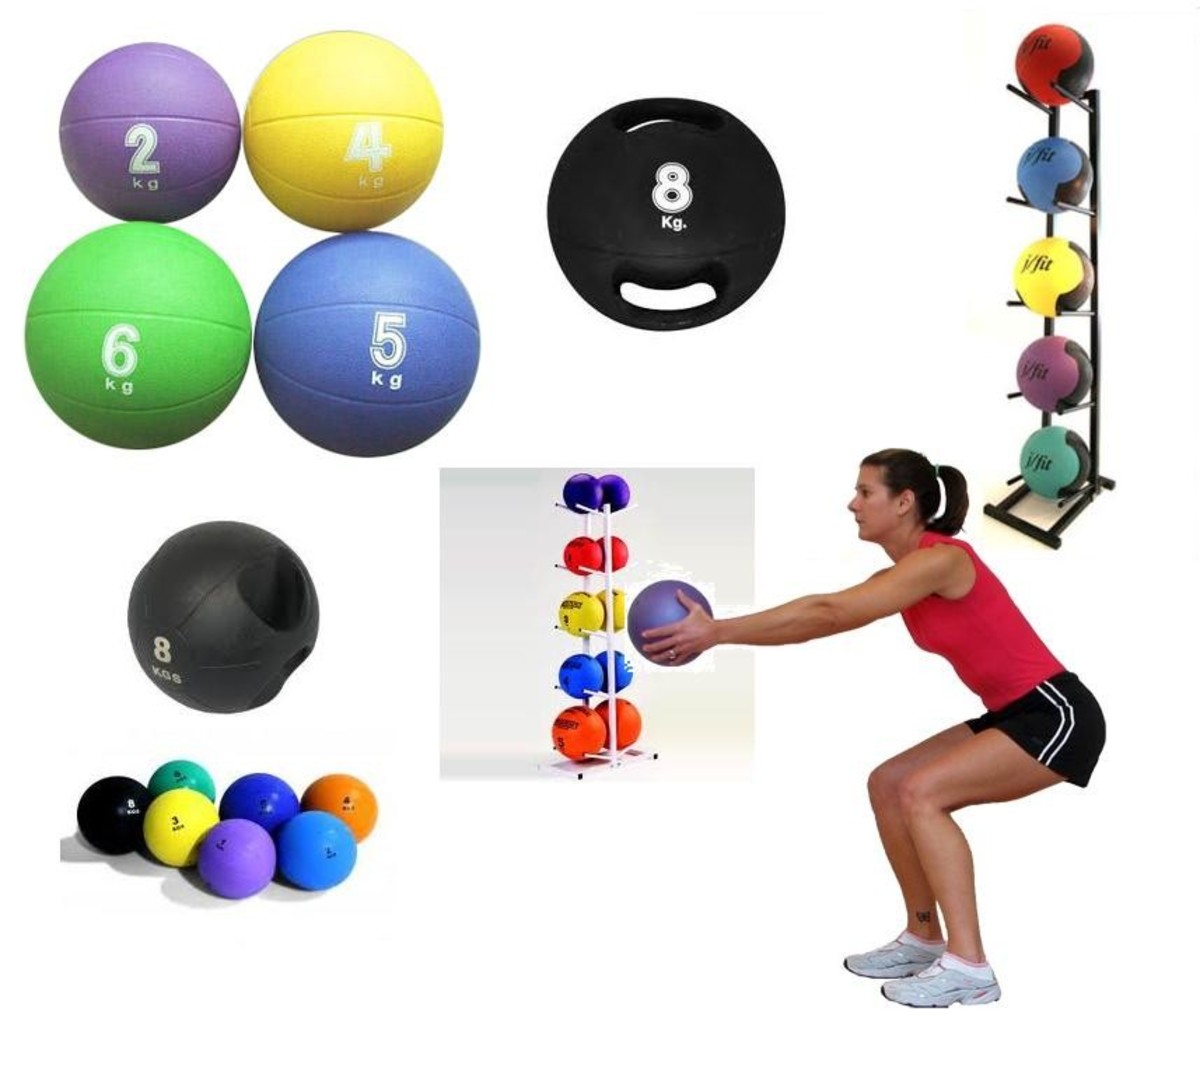 buy-exercise-fitness-medicine-ball-posters-for-the-home-gym